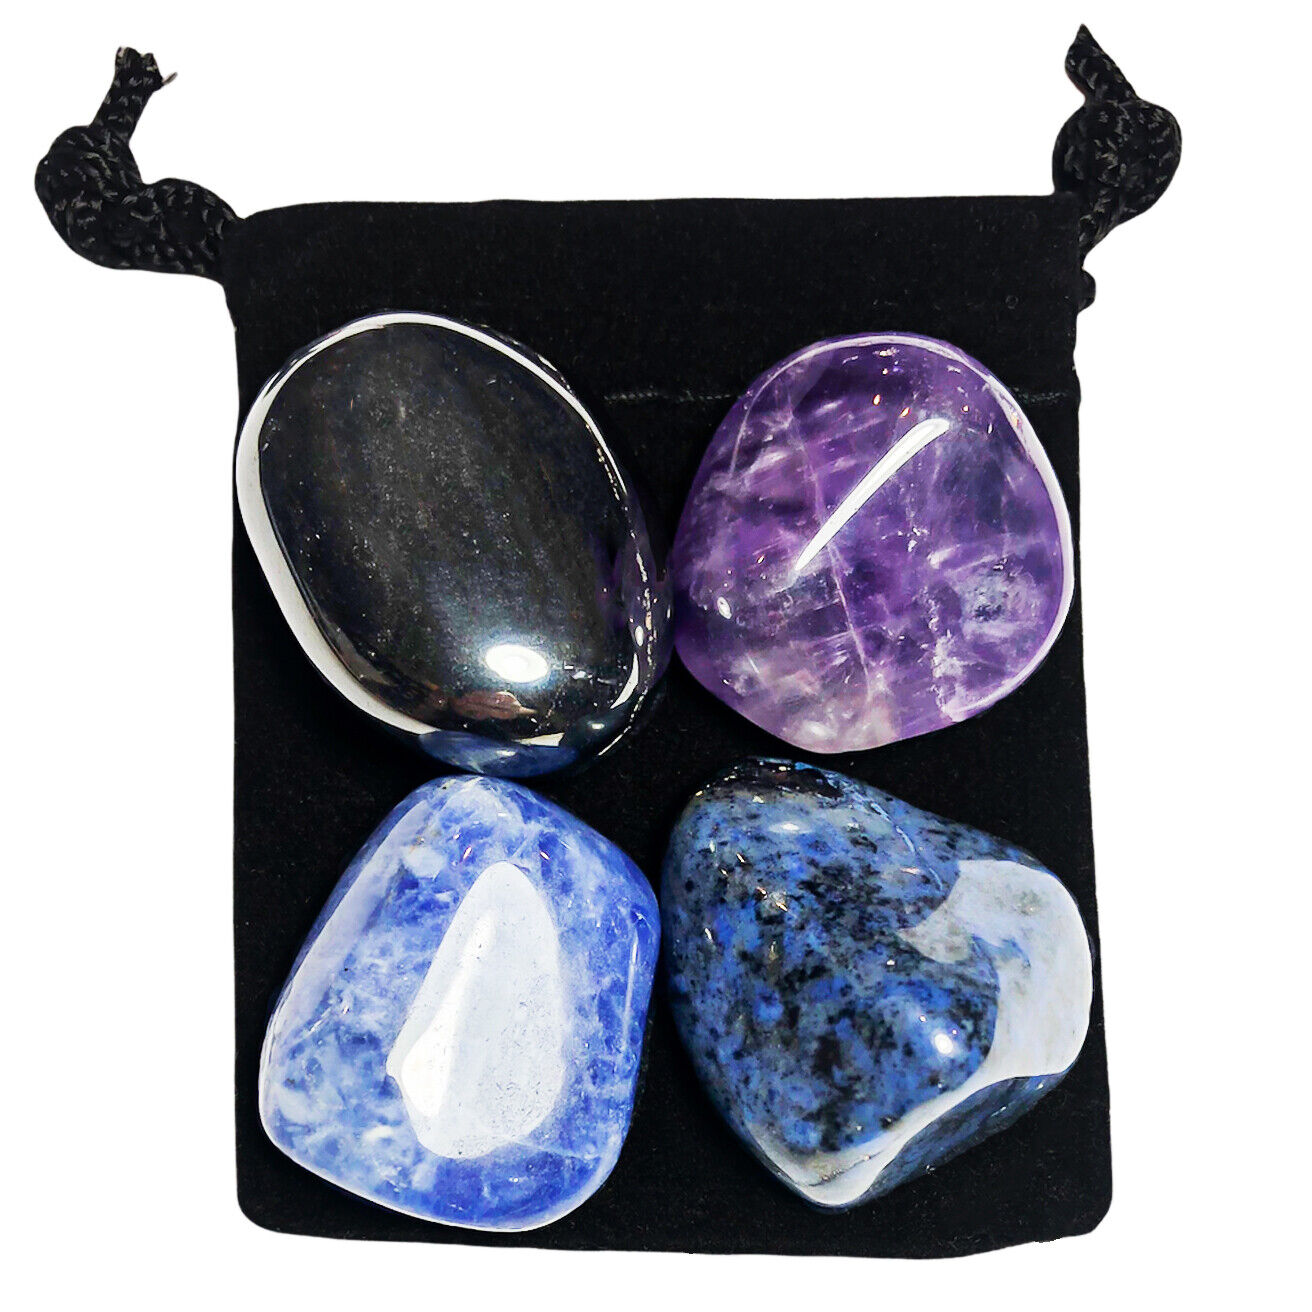 INSOMNIA Tumbled Crystal Healing Set  = 4 Stones + Pouch + Description Card